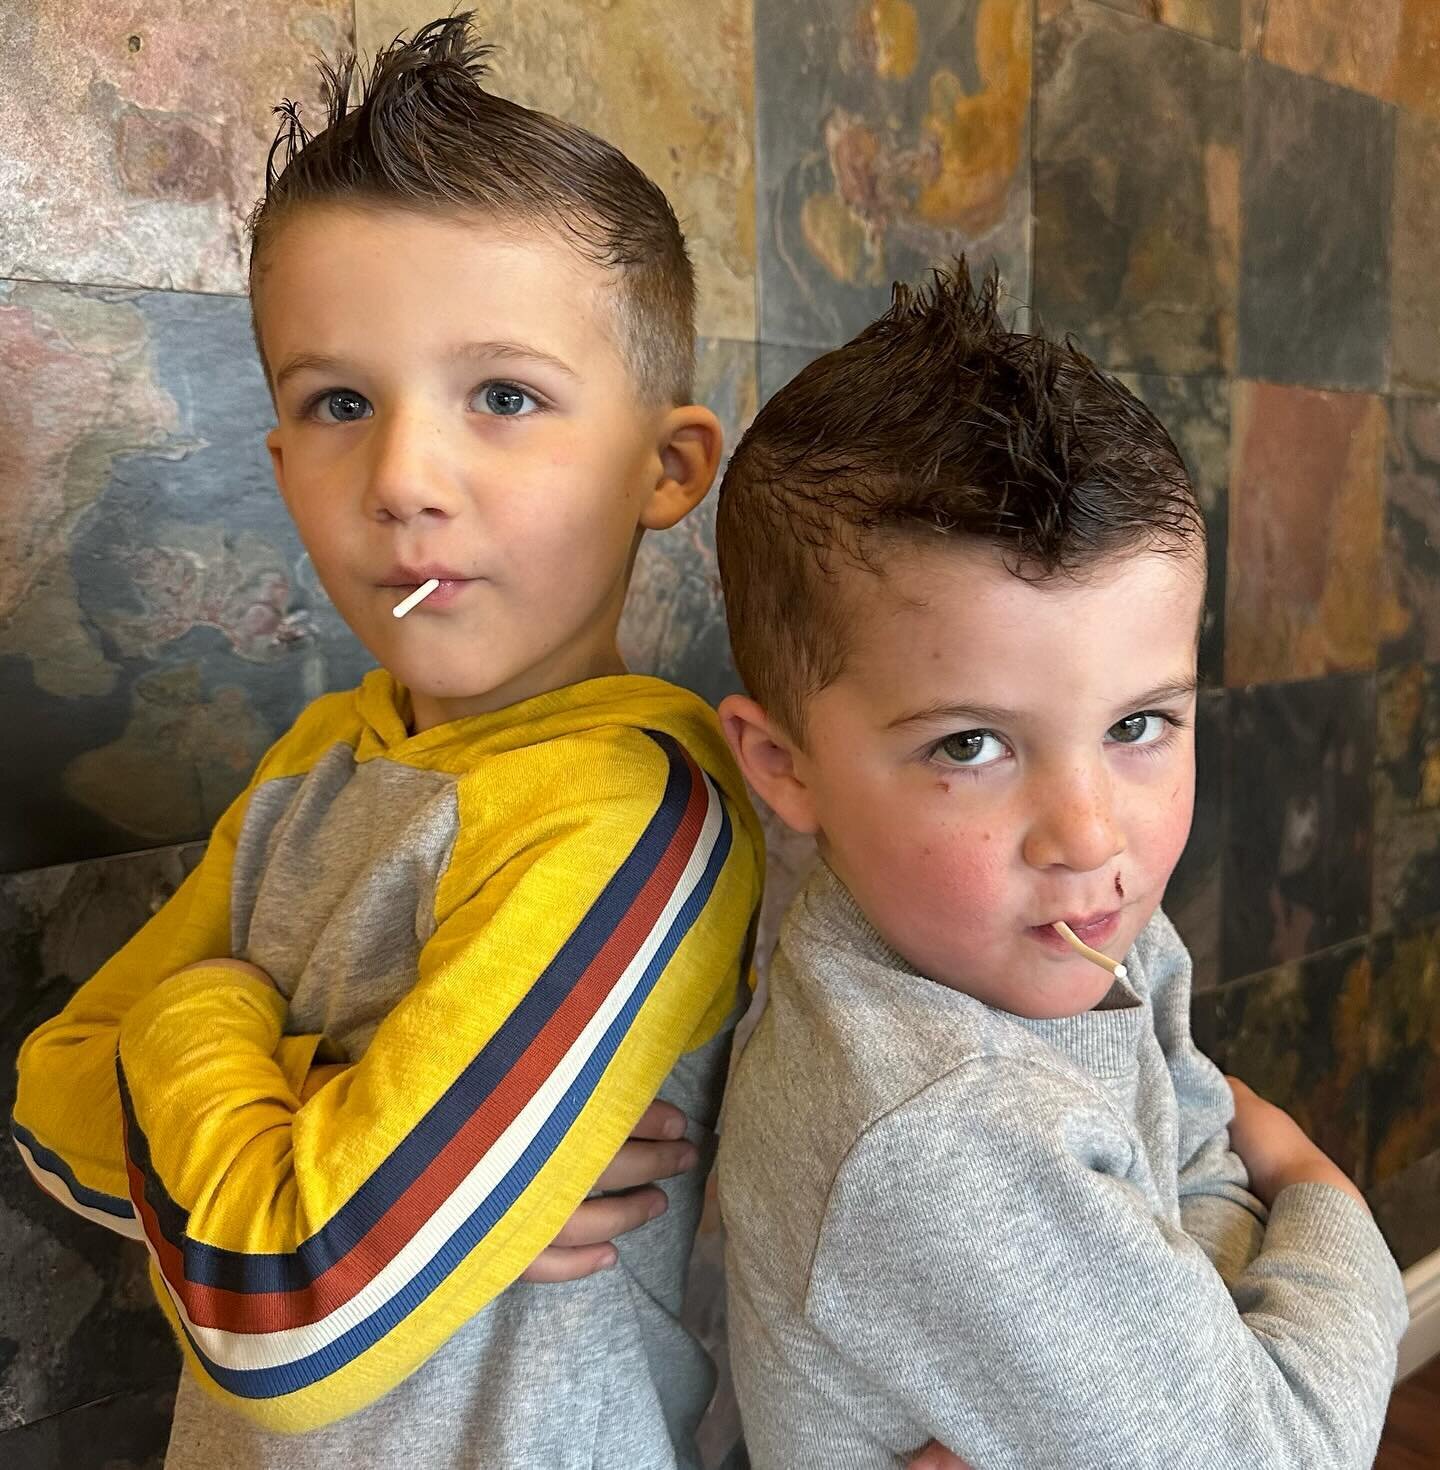 &ldquo;OK Tough Guy.  Let&rsquo;s See What You&rsquo;ve Got. 💪 And Before You Do Anything, Make Sure You Look Good.&rdquo;👍
✨Haircut &amp; Style on These Tough Brothers by Joe! 
✨Call : 914-412-7755
✨Online Reservations Link in Bio or at thefinemen